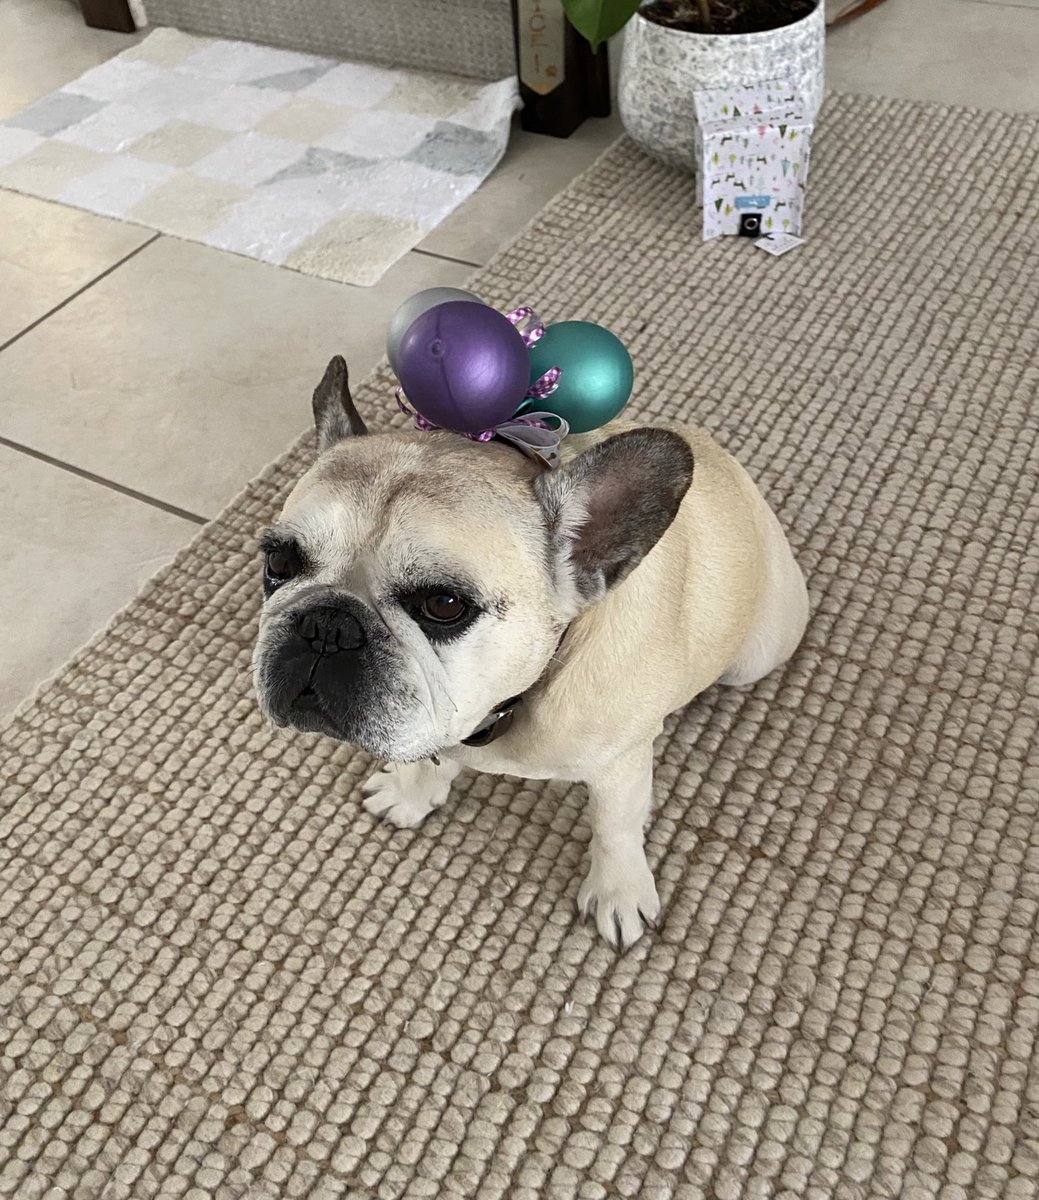 If we’re lucky, we will be reborn many times in our lifetime.
#HAPPYEASTER 💚💛🤍💜💗
#thegiftoflife #HappySunday #lifewithfrenchies #Sugar #thesweetlife #thelittlethings #Hope #monkeylife #zoolife #frenchies #furbabies #thebestestgirl